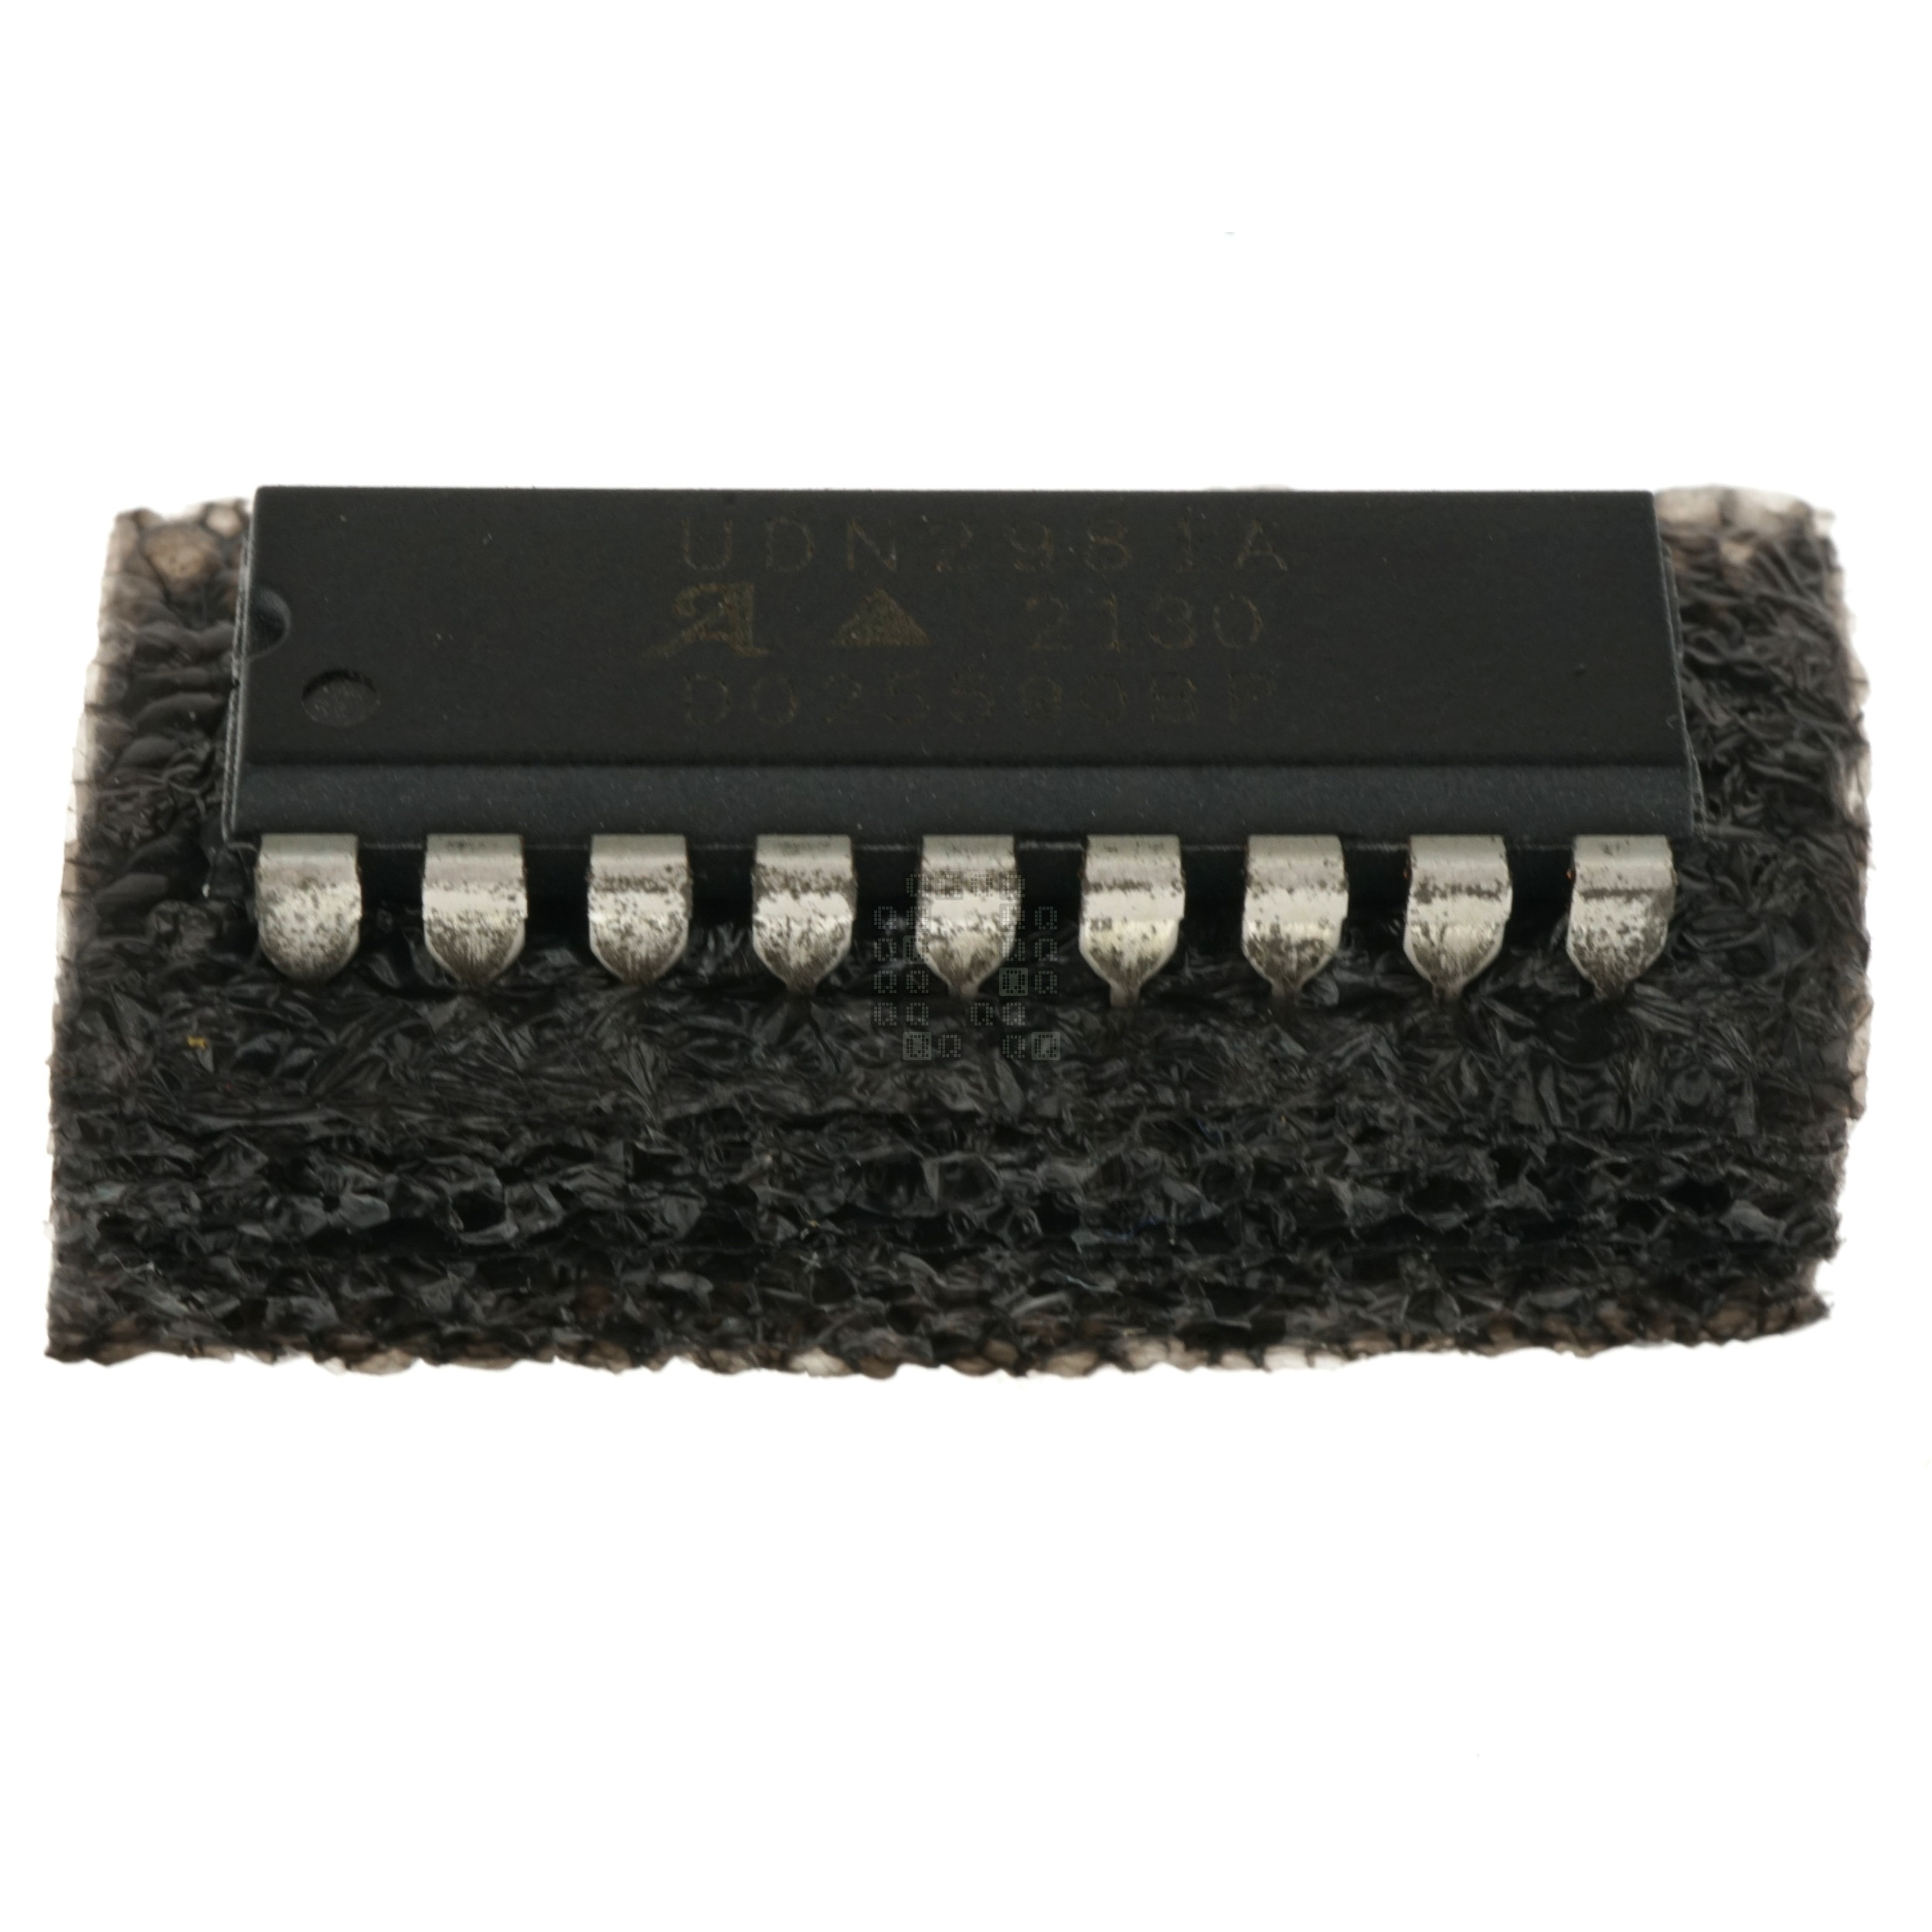 Allegro UDN2981A 8-Channel Source Driver IC Integrated Circuit, DIP18